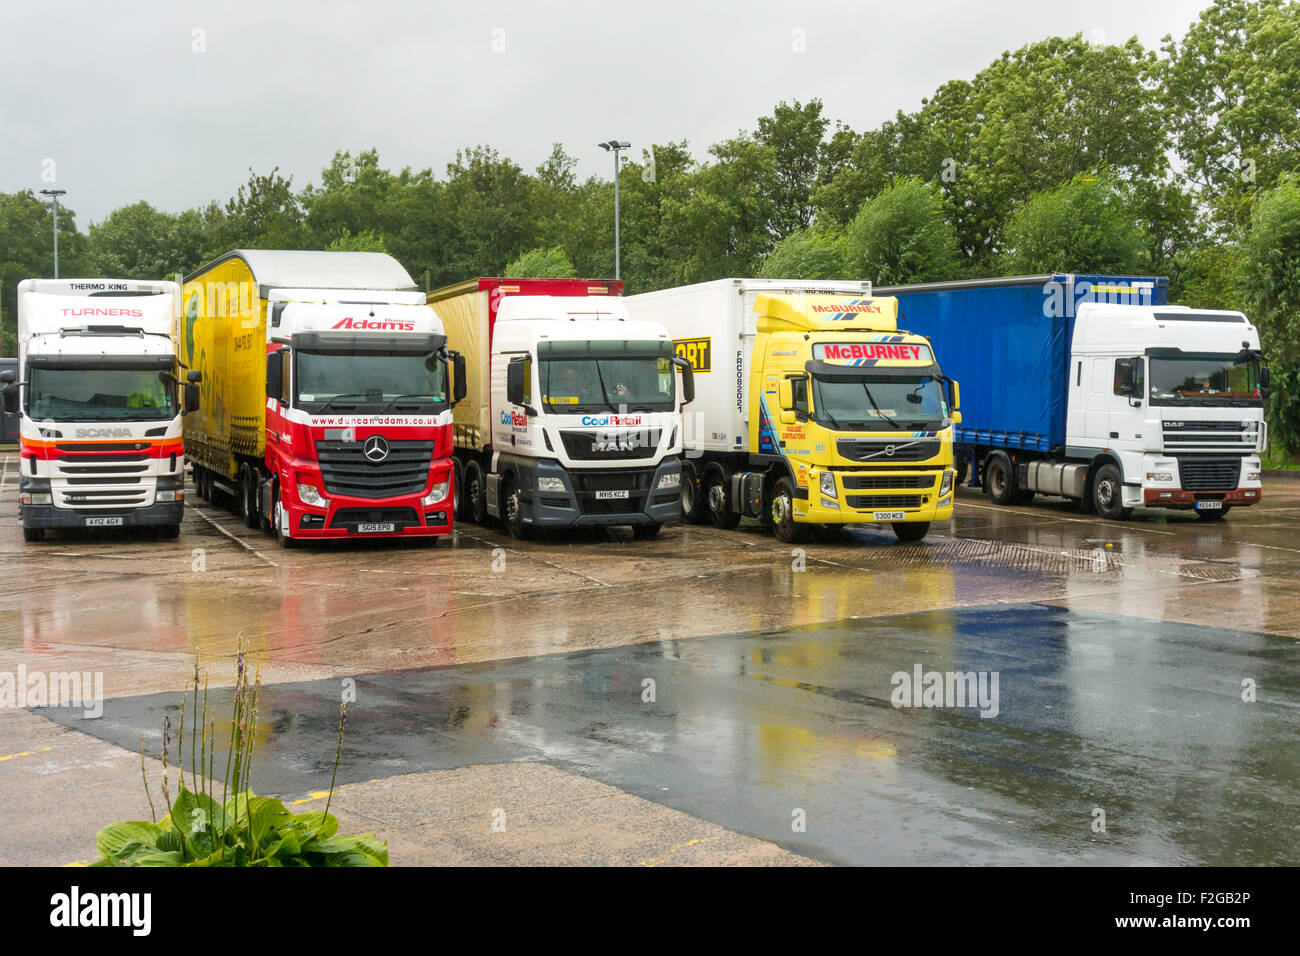 Lorries parked at the Tebay Truck Stop at Junction 38 on the M6 motorway, Cumbria England UK. Stock Photo